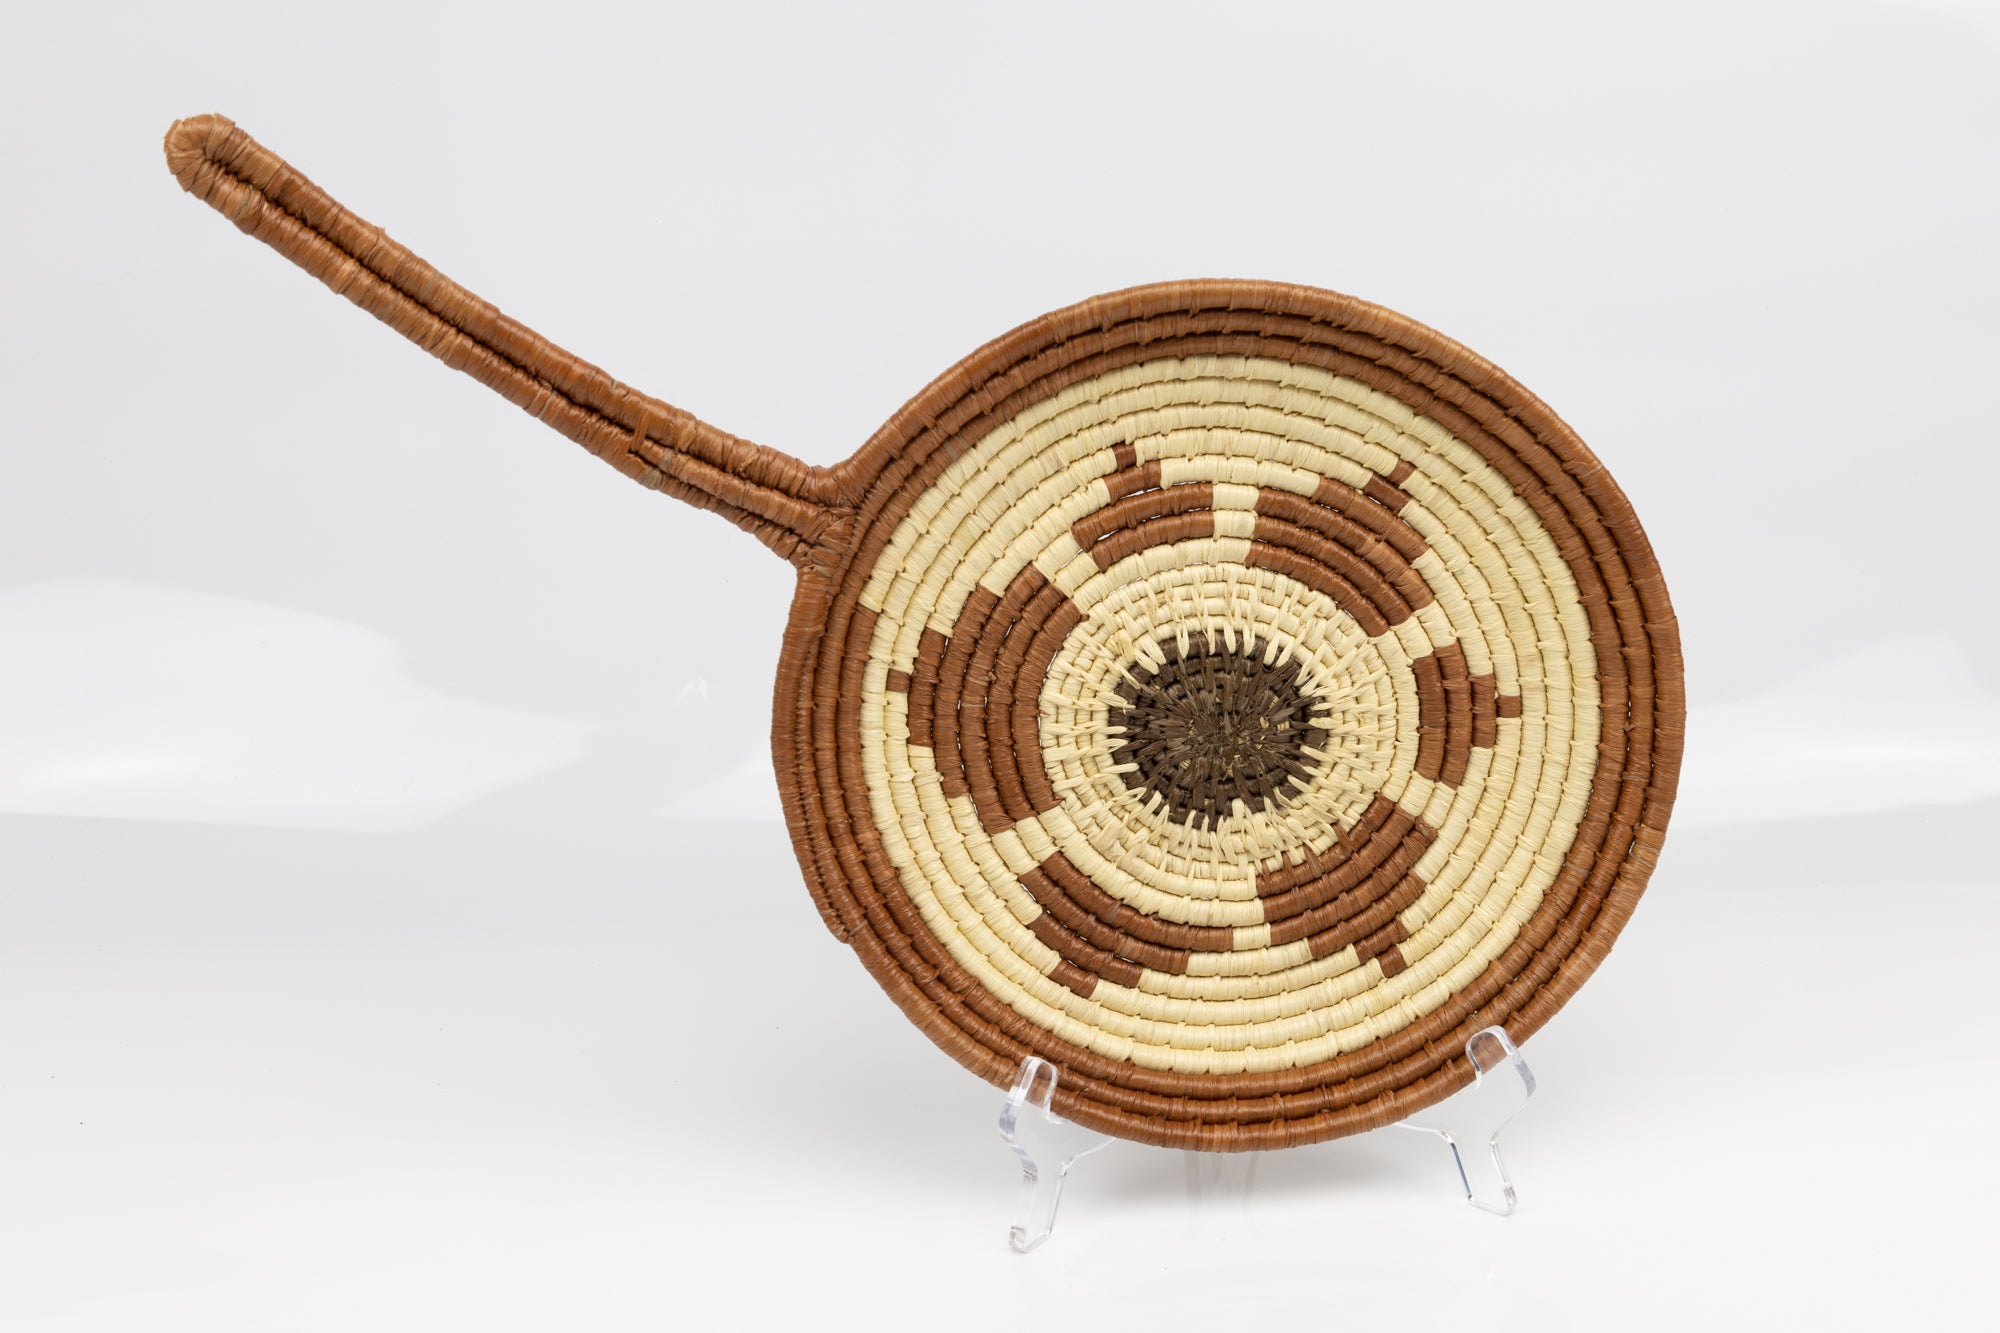 Hand woven plate basket with frying pan design. Palm fiber natural dyes and reed. Woven in Panama.